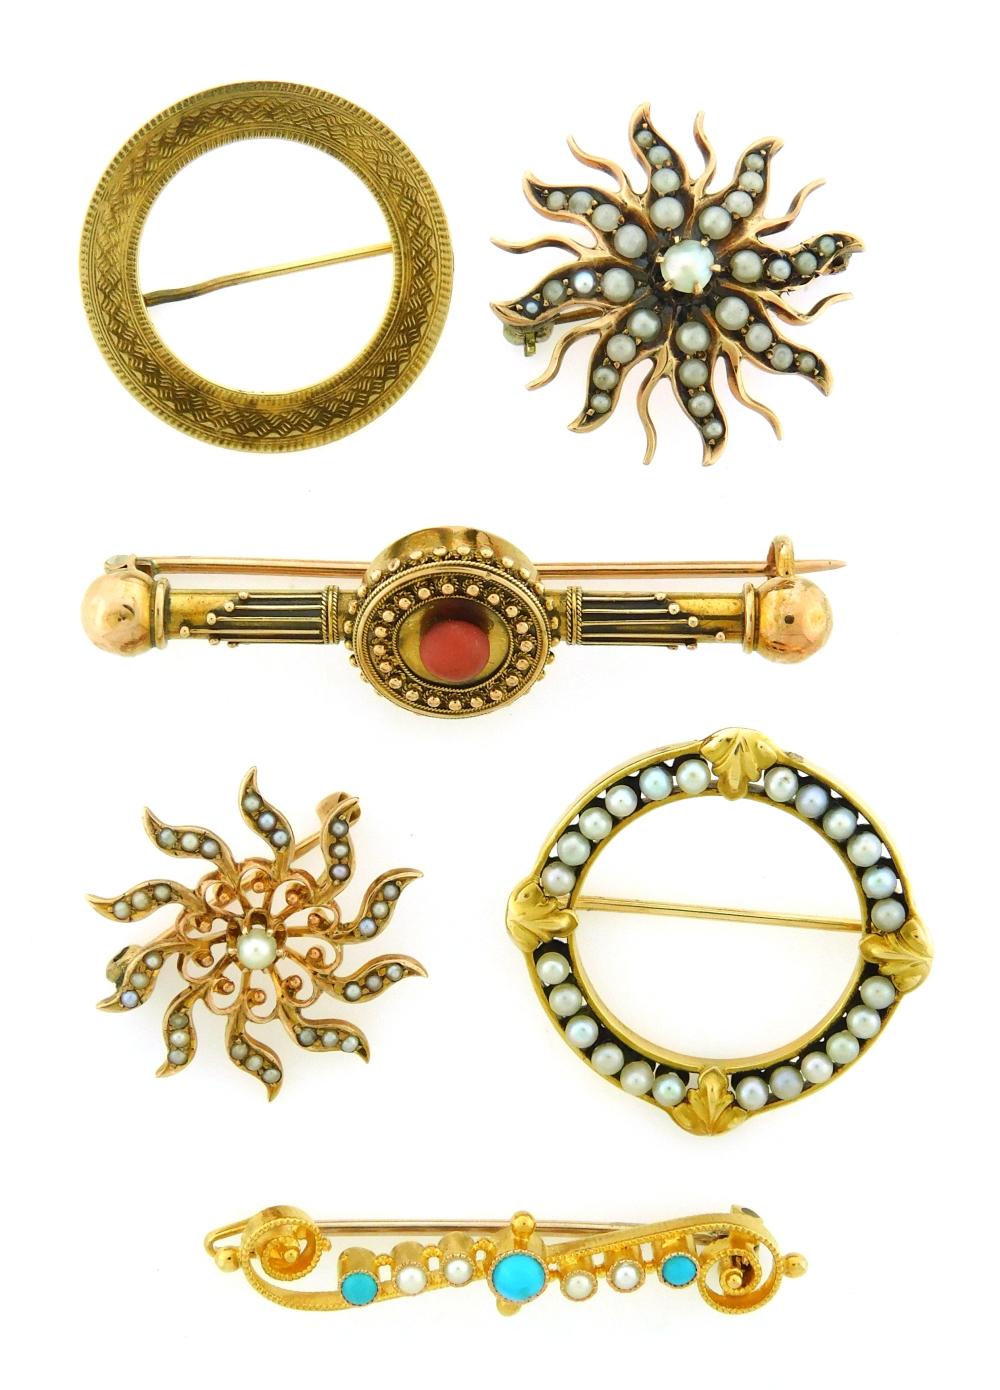 JEWELRY: SIX GOLD VINTAGE PINS,